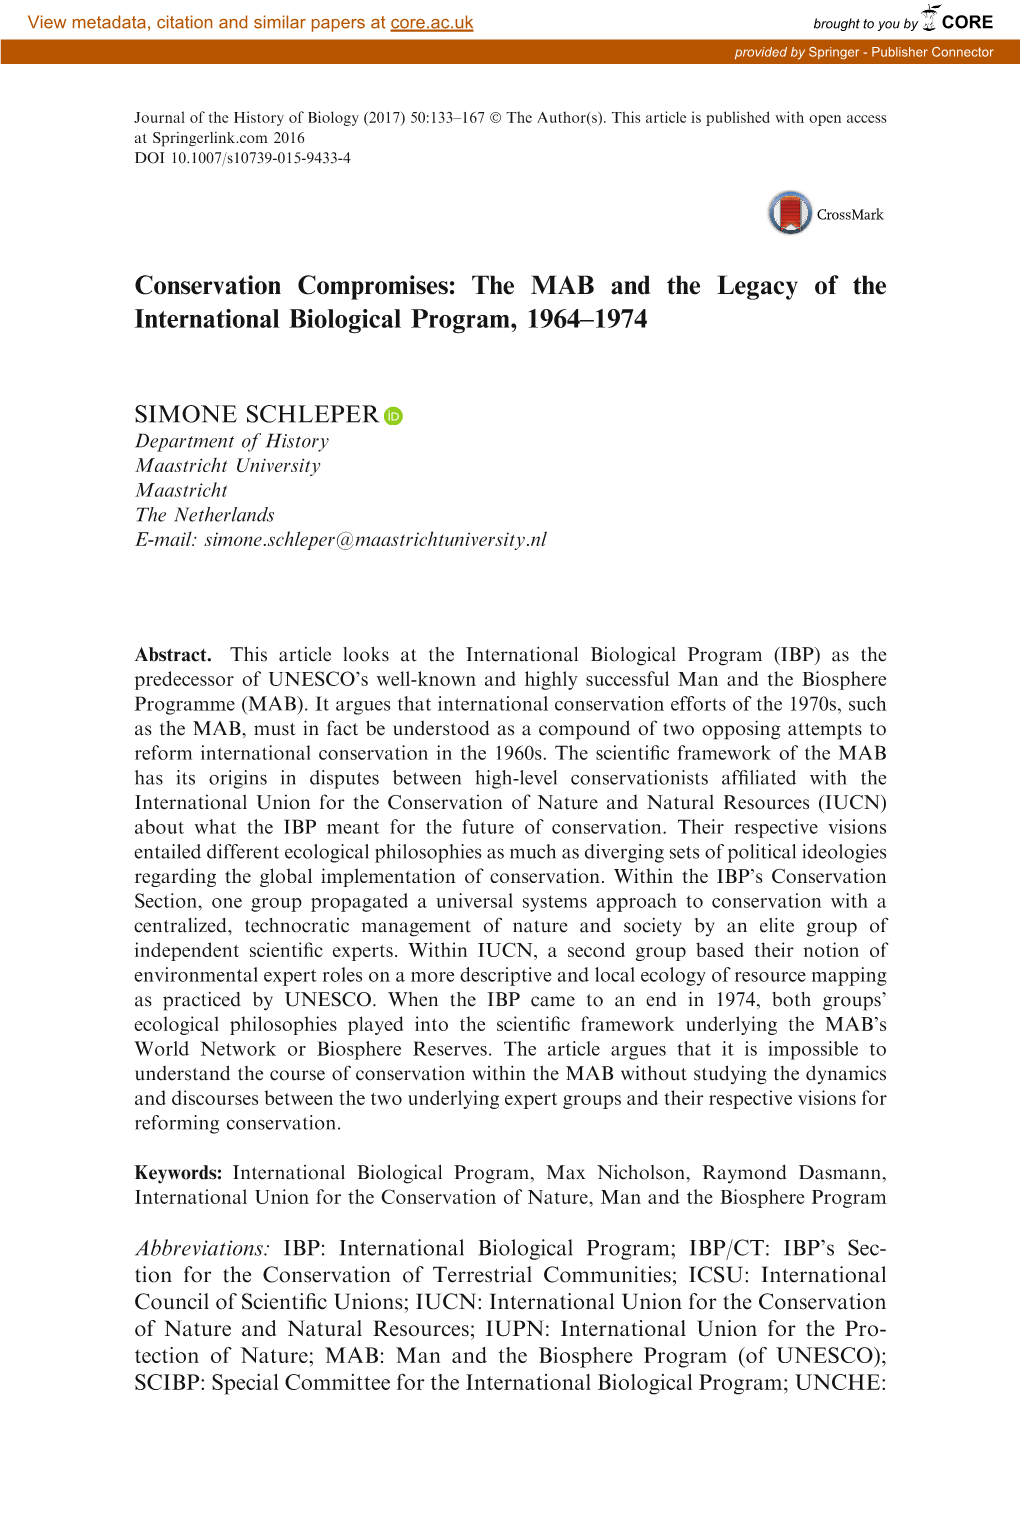 Conservation Compromises: the MAB and the Legacy of the International Biological Program, 1964–1974